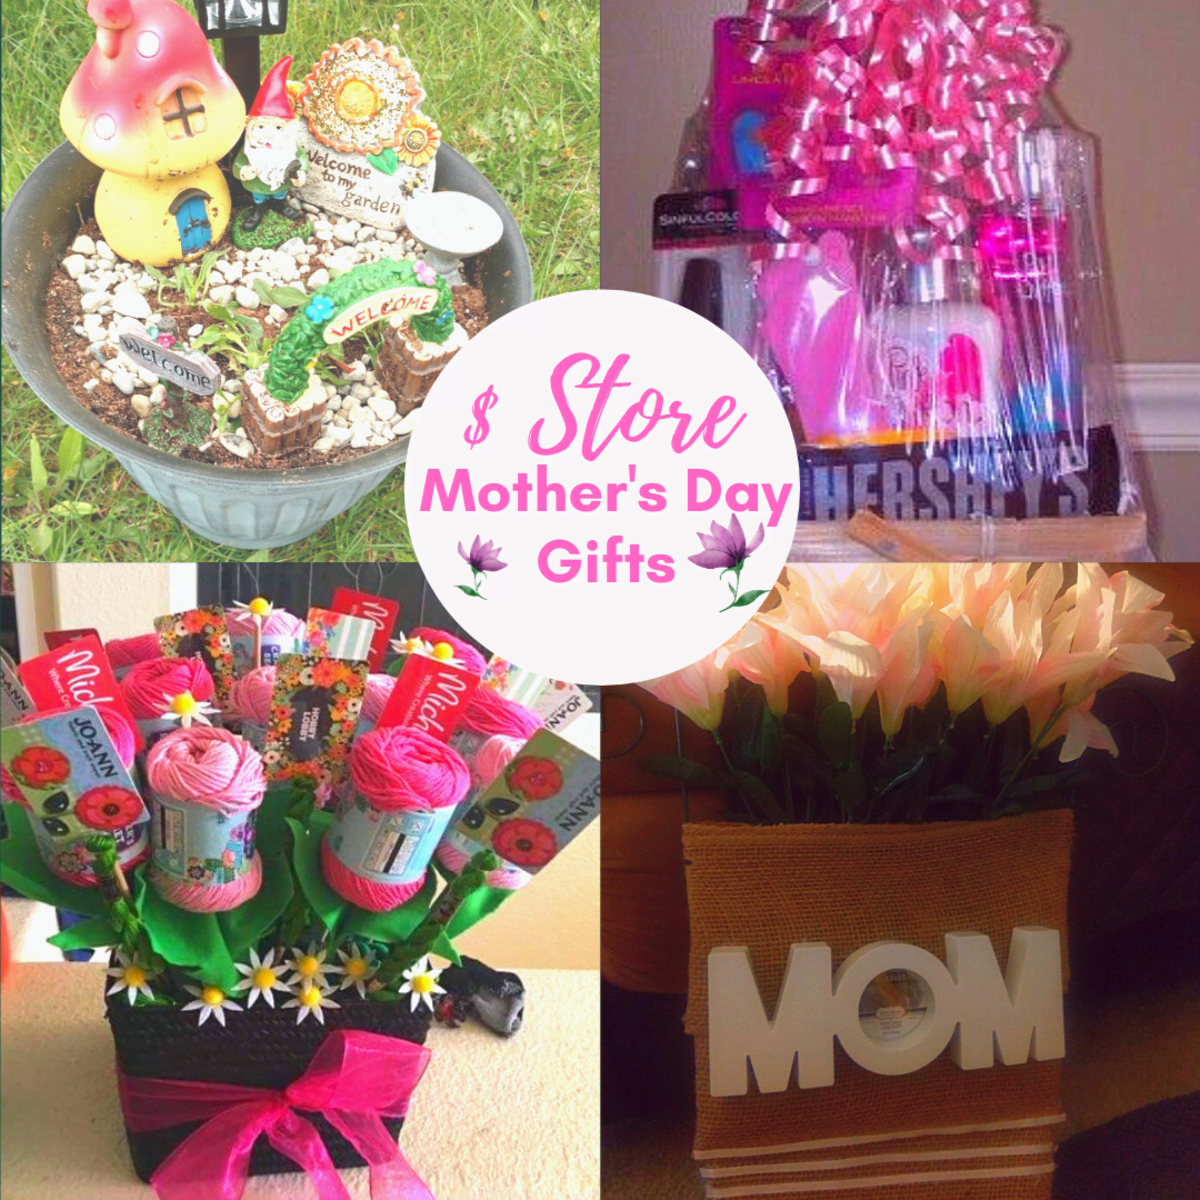 19 easy DIY Mother's Day gifts and craft projects for every type of mom -  Reviewed